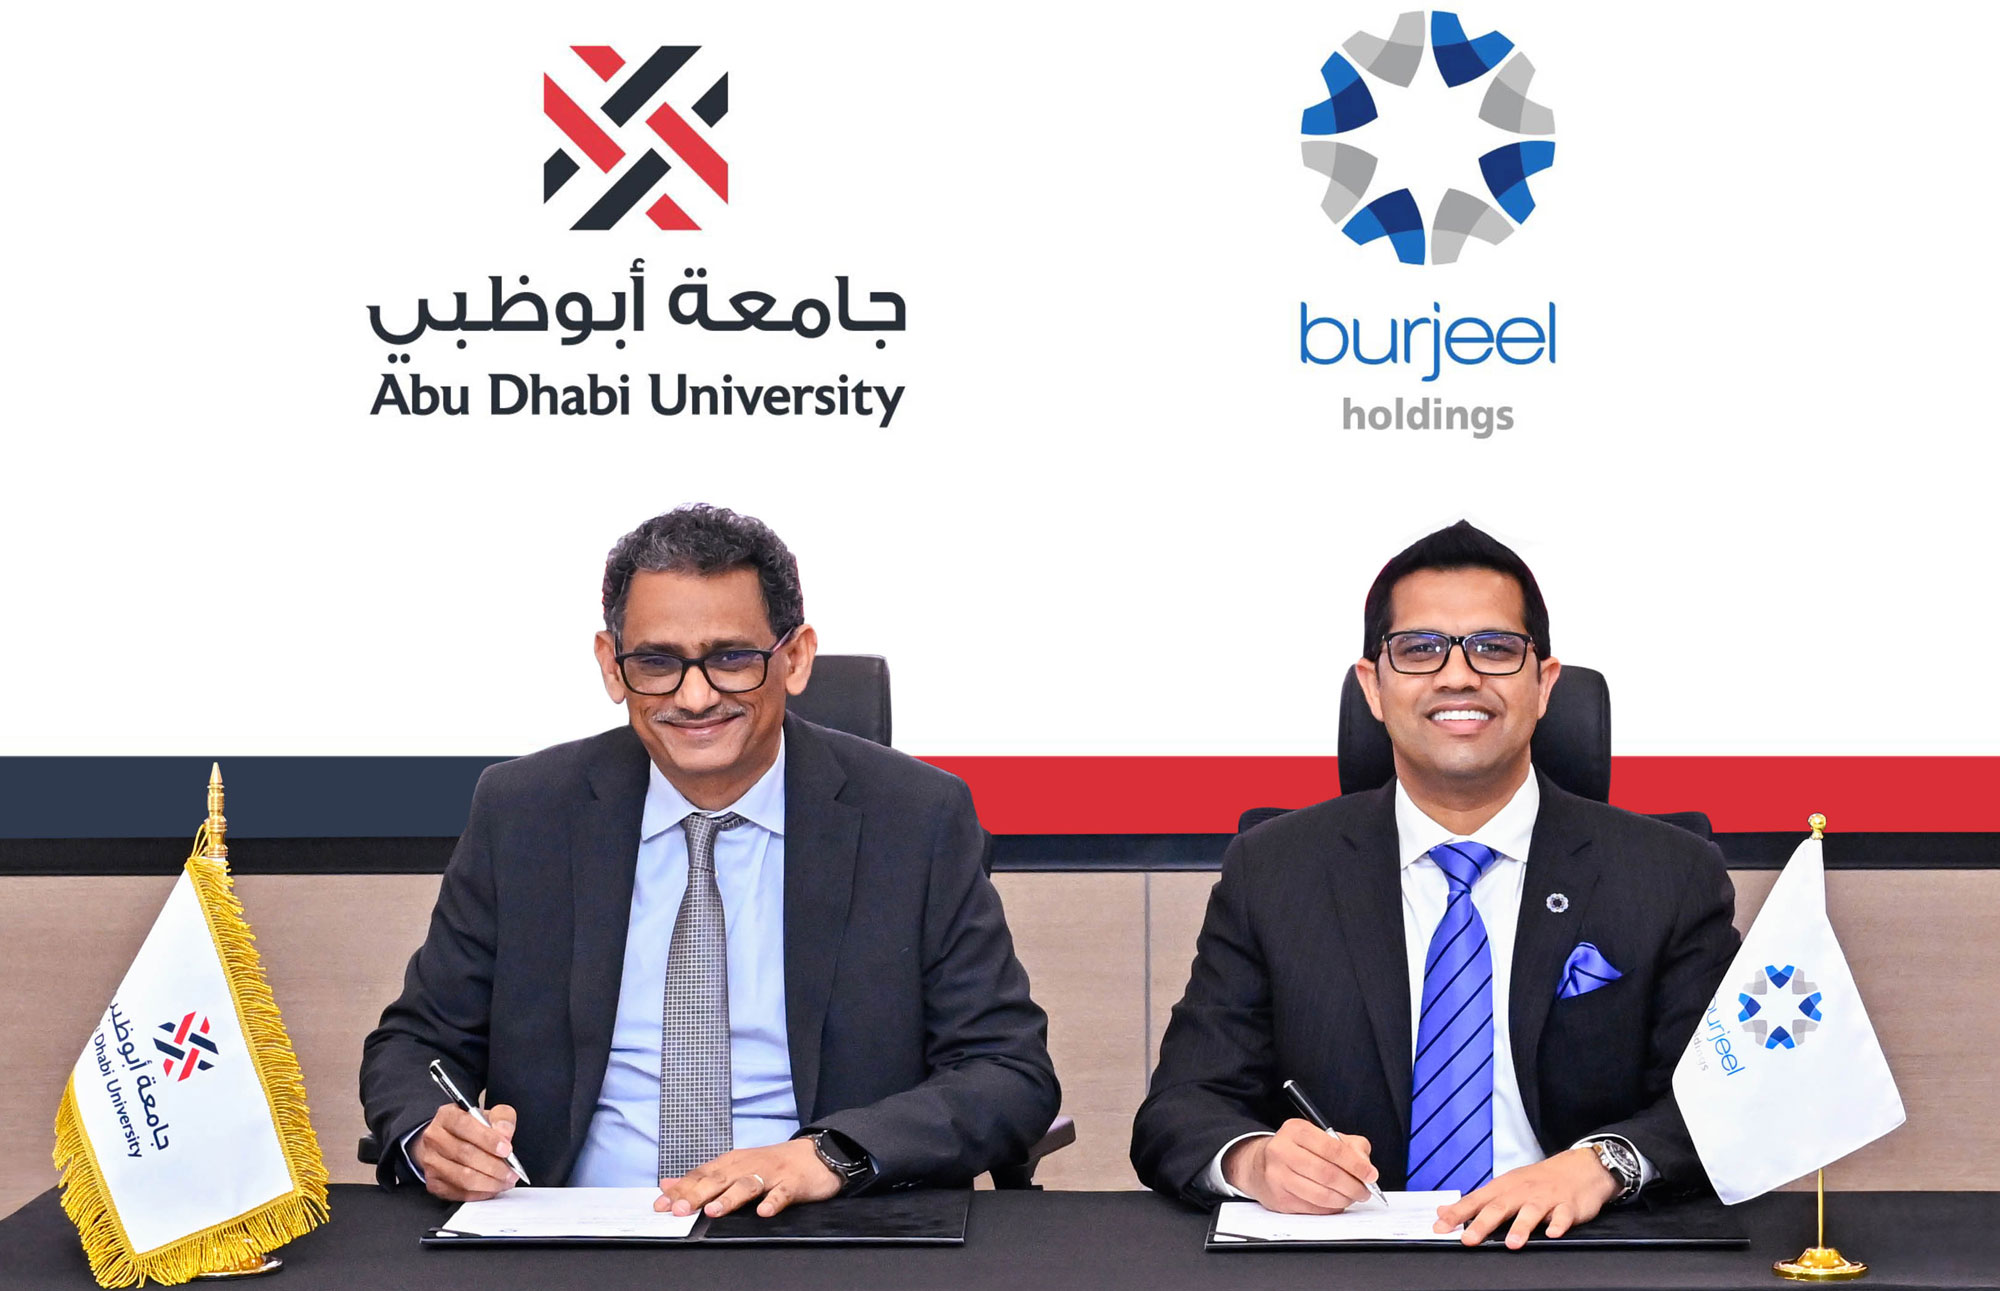 ADU Partners with Burjeel Holdings to Advance Clinical Research and Enhance Academic Programs